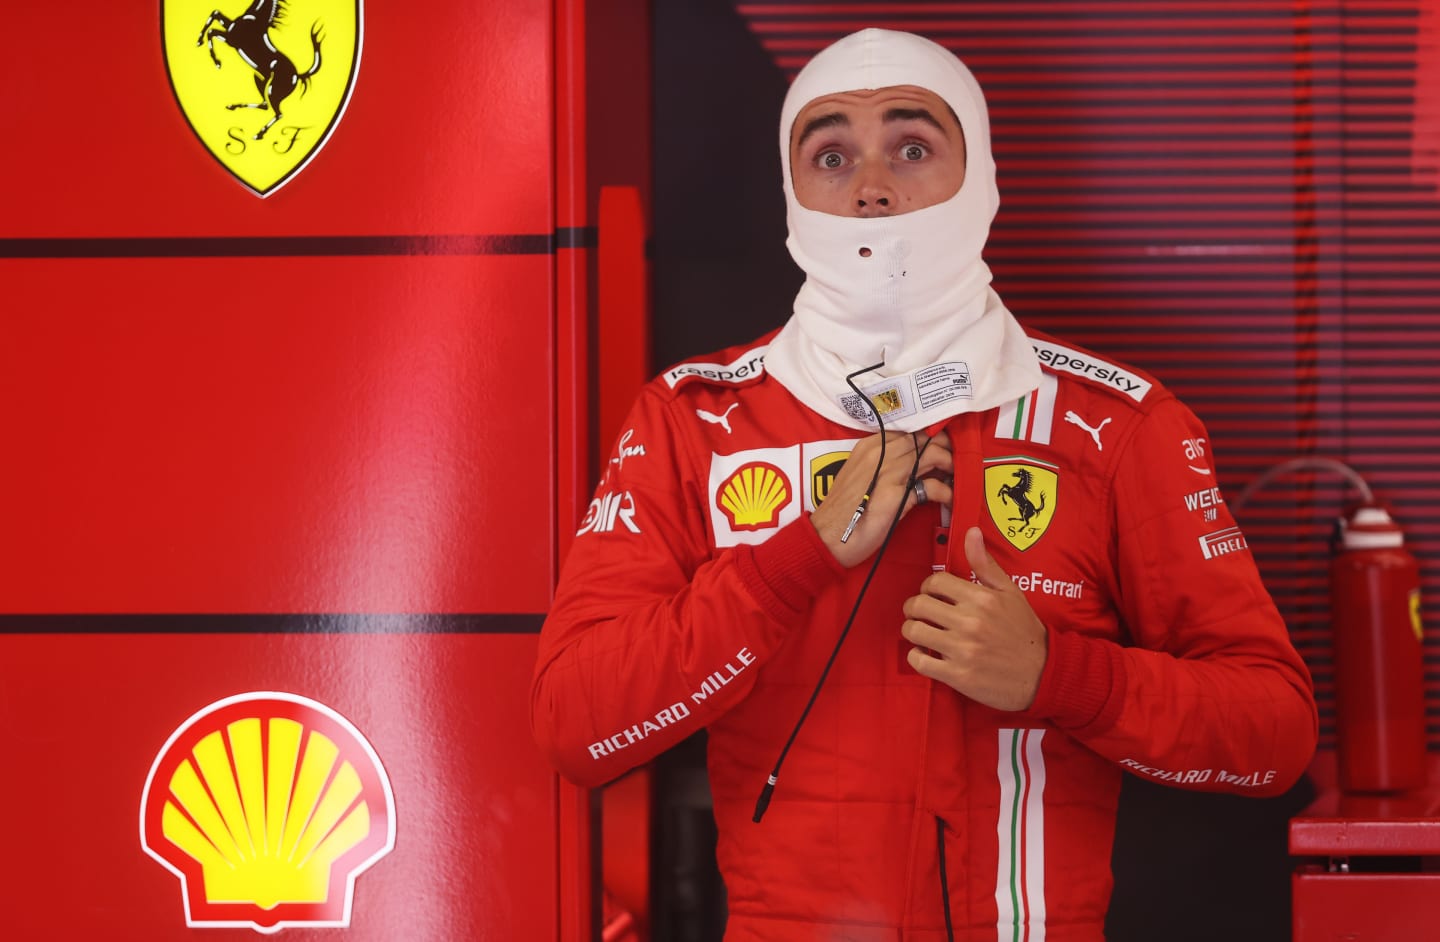 MONZA, ITALY - SEPTEMBER 11: Charles Leclerc of Monaco and Ferrari prepares to drive in the garage prior to the Sprint ahead of the F1 Grand Prix of Italy at Autodromo di Monza on September 11, 2021 in Monza, Italy. (Photo by Lars Baron/Getty Images)